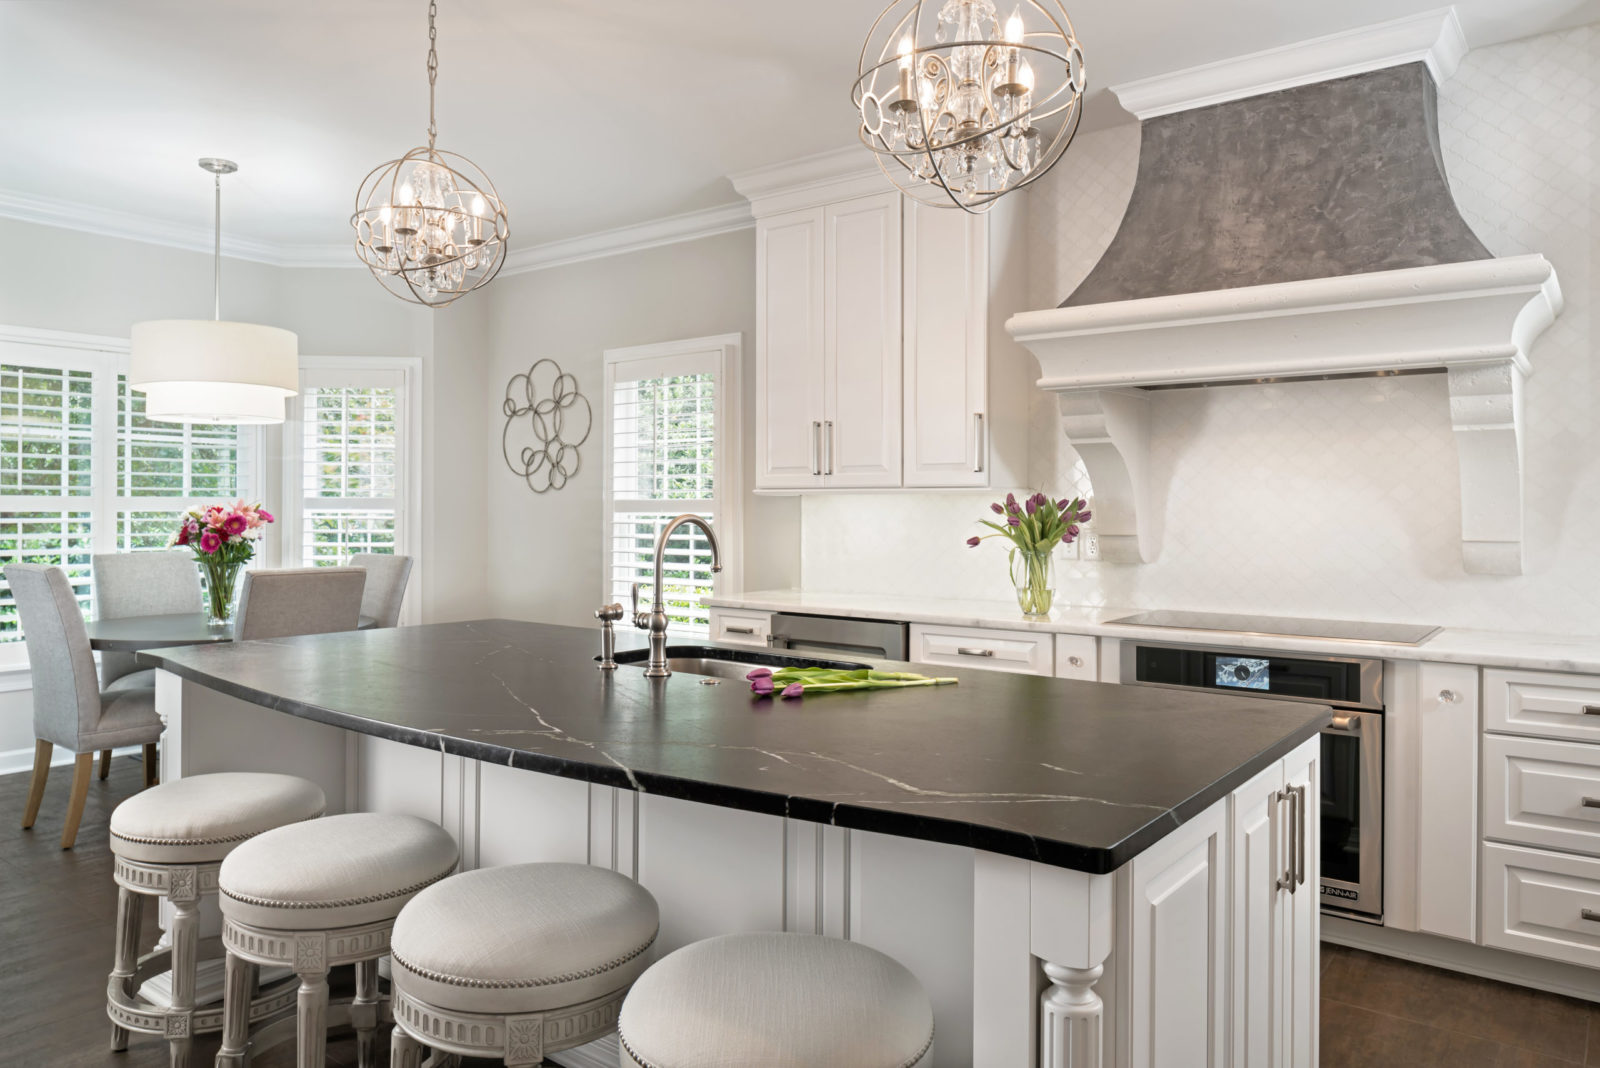 Kitchen Remodel Black And White Design In South Charlotte Revision Charlotte